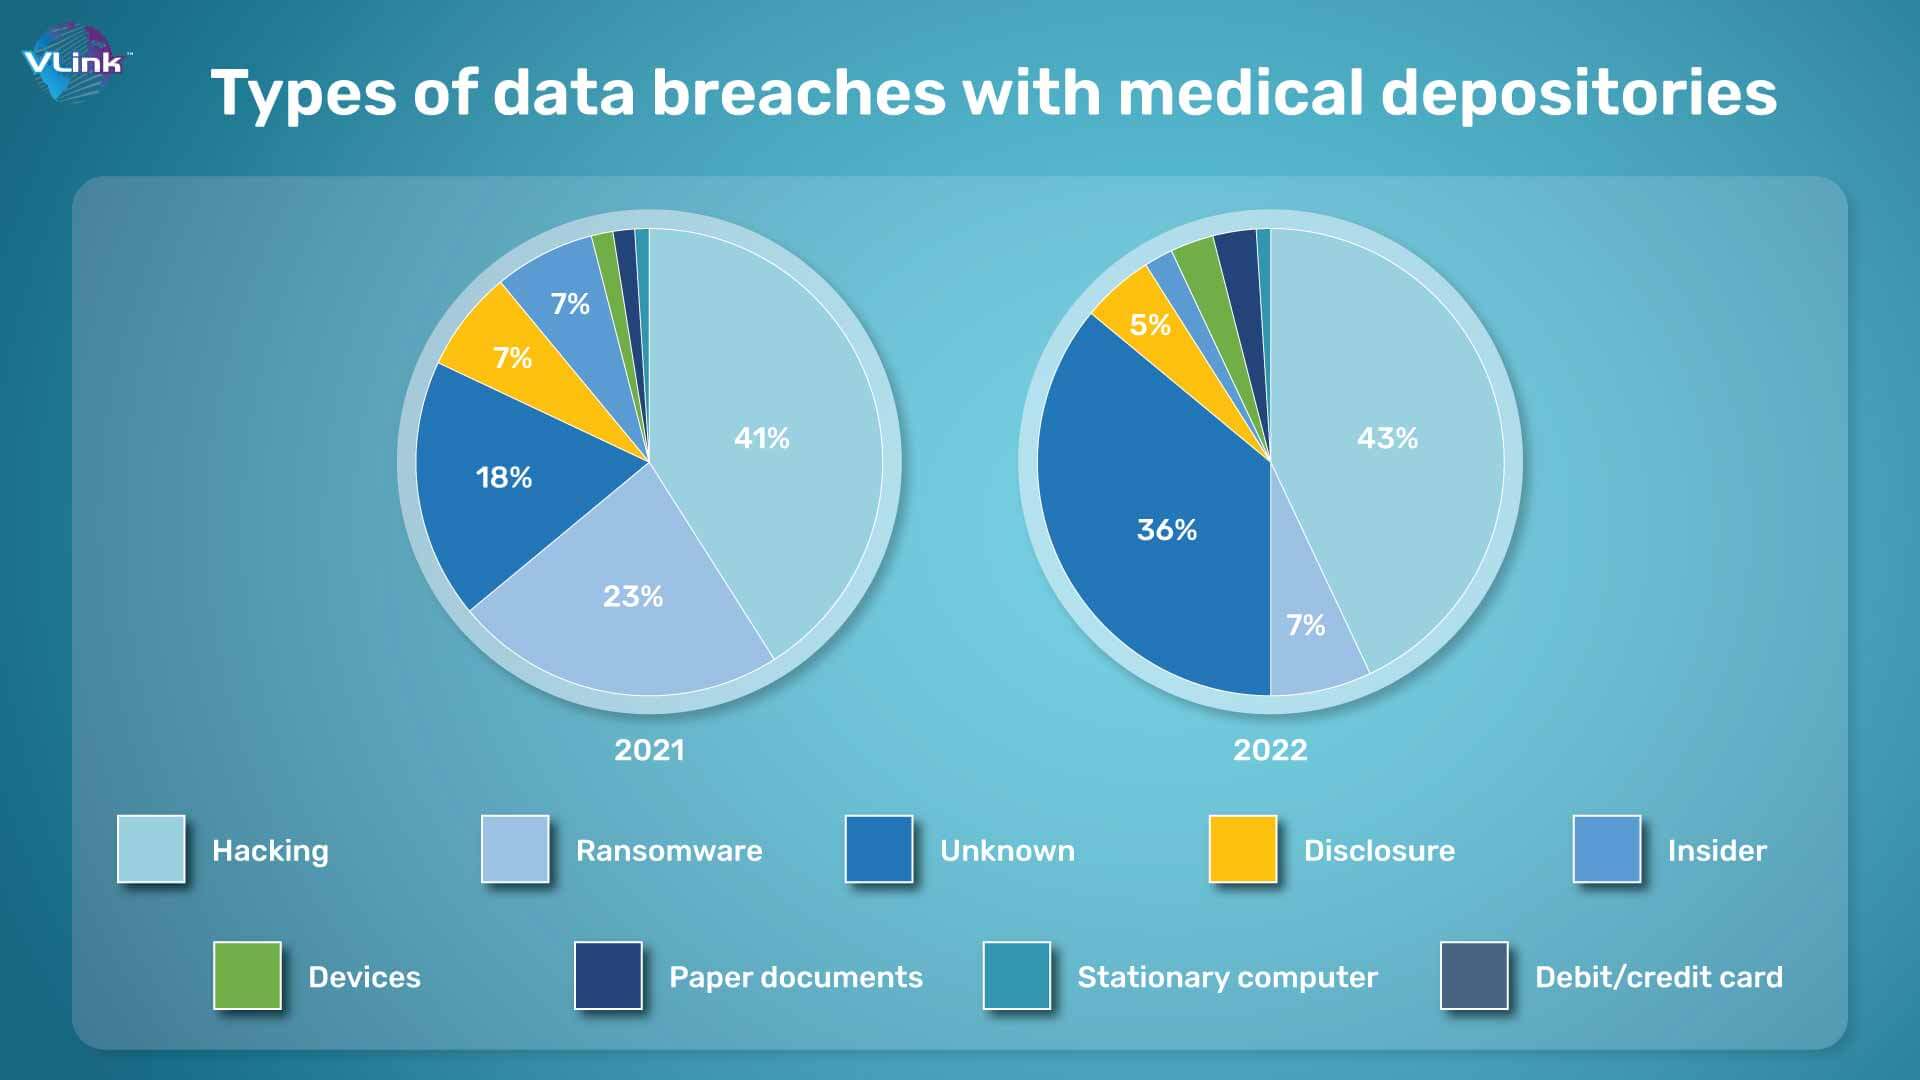 Types of data breaches with medical depositories